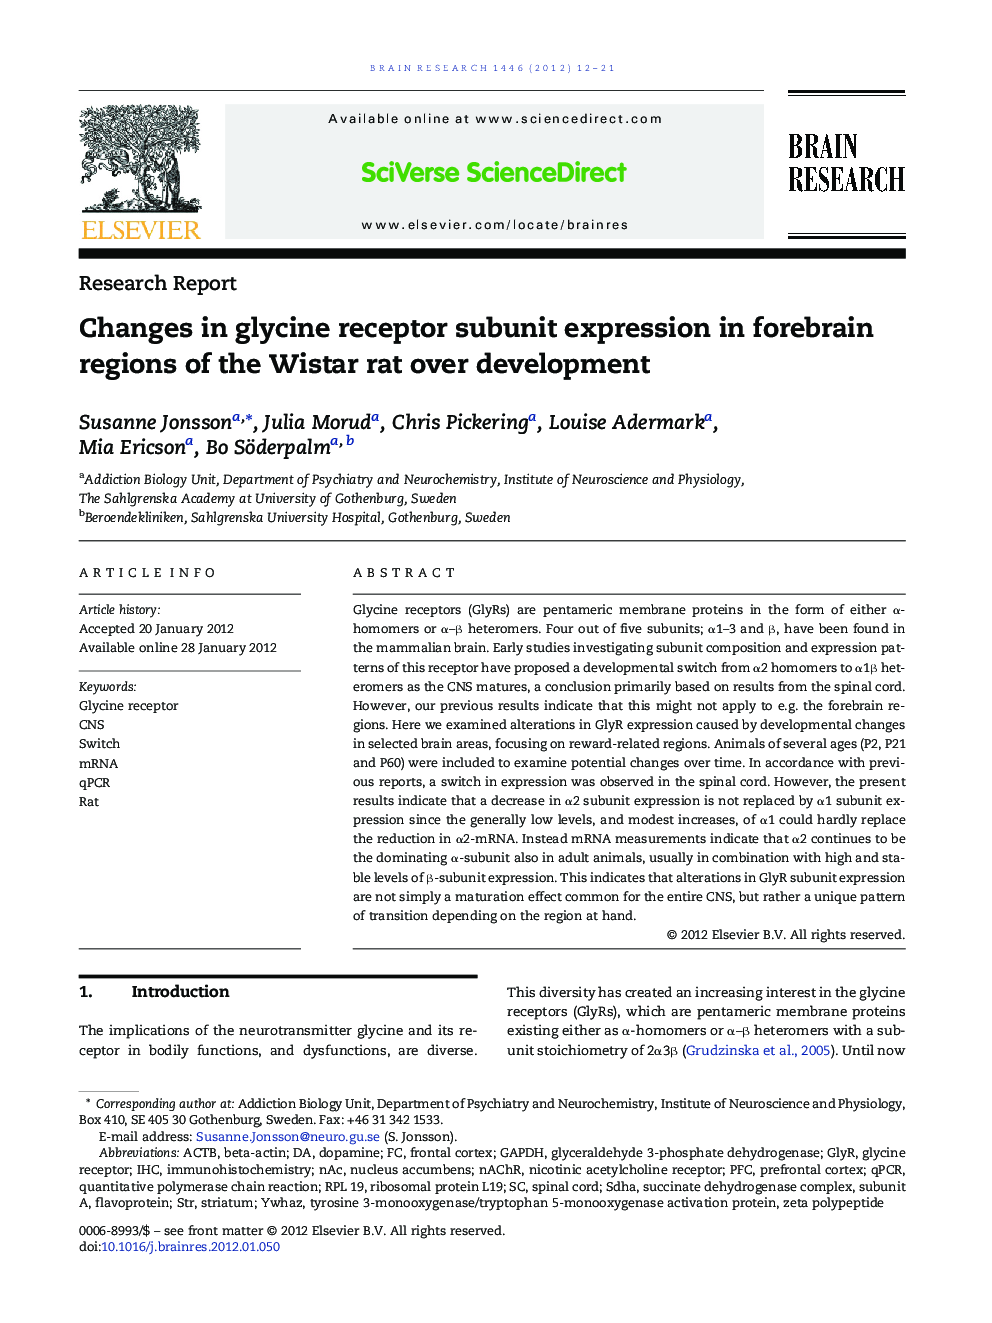 Changes in glycine receptor subunit expression in forebrain regions of the Wistar rat over development